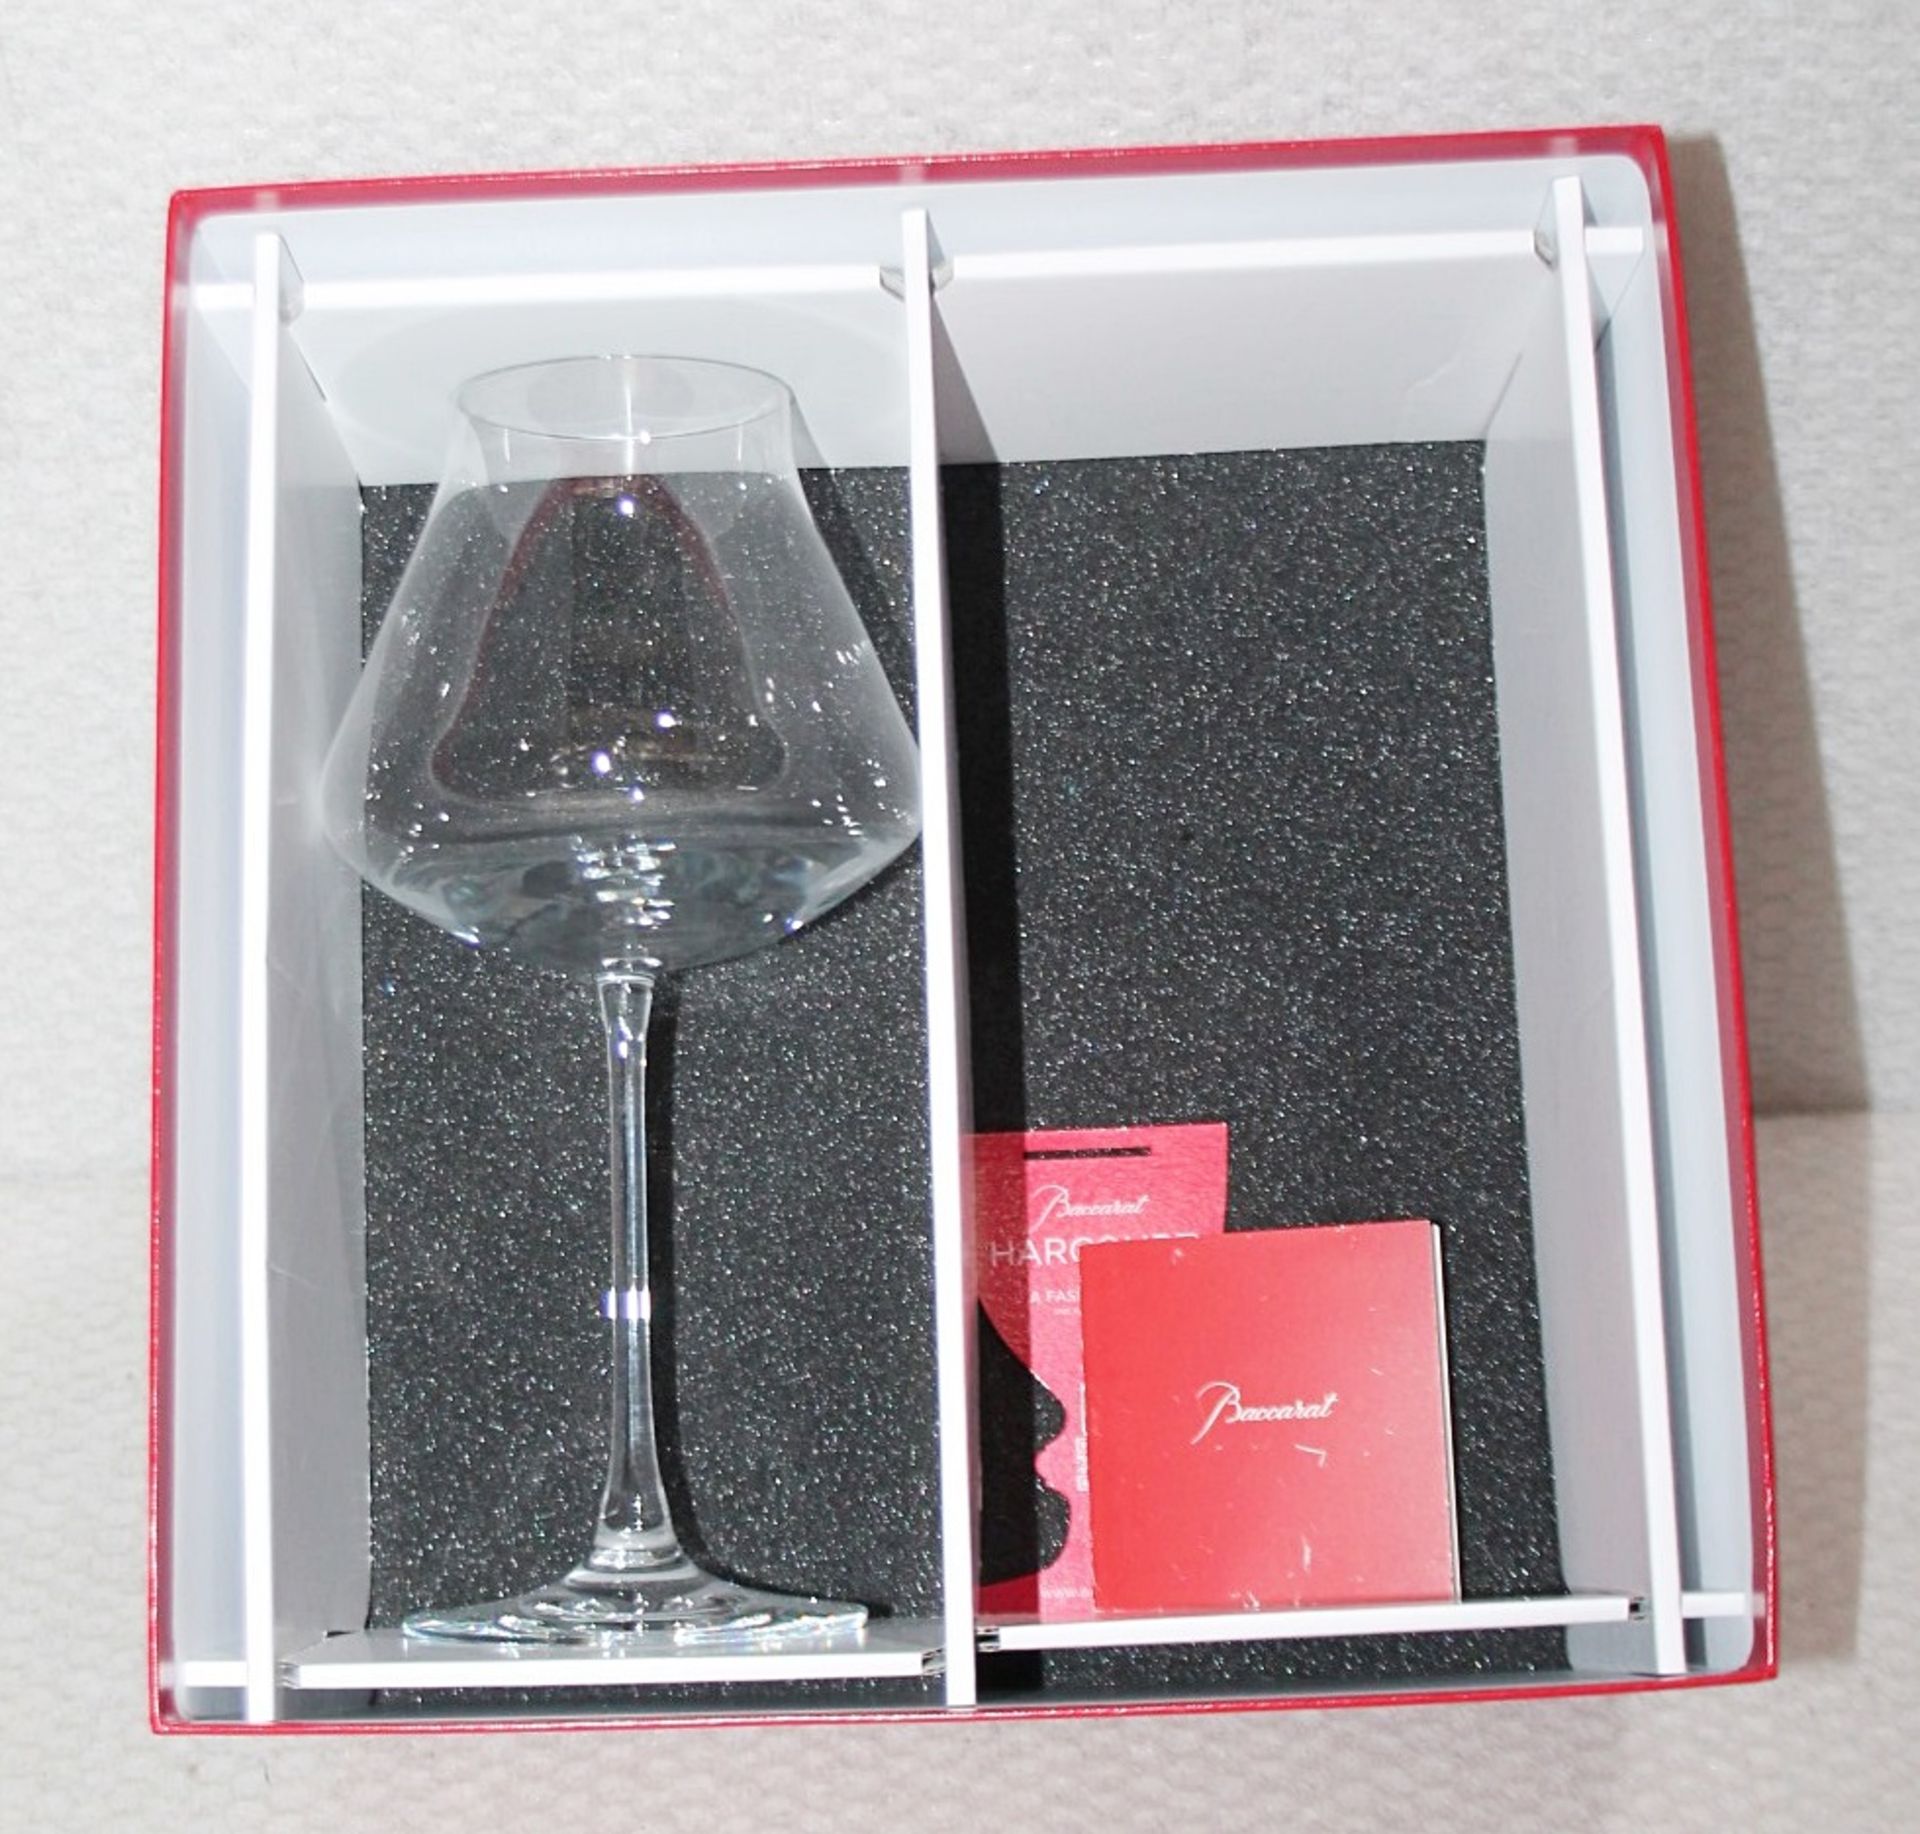 1 x BACCARAT 'Château' Crystal Red Wine Glass - Original Price £80.00 - Unused Boxed Stock - Ref: - Image 3 of 6